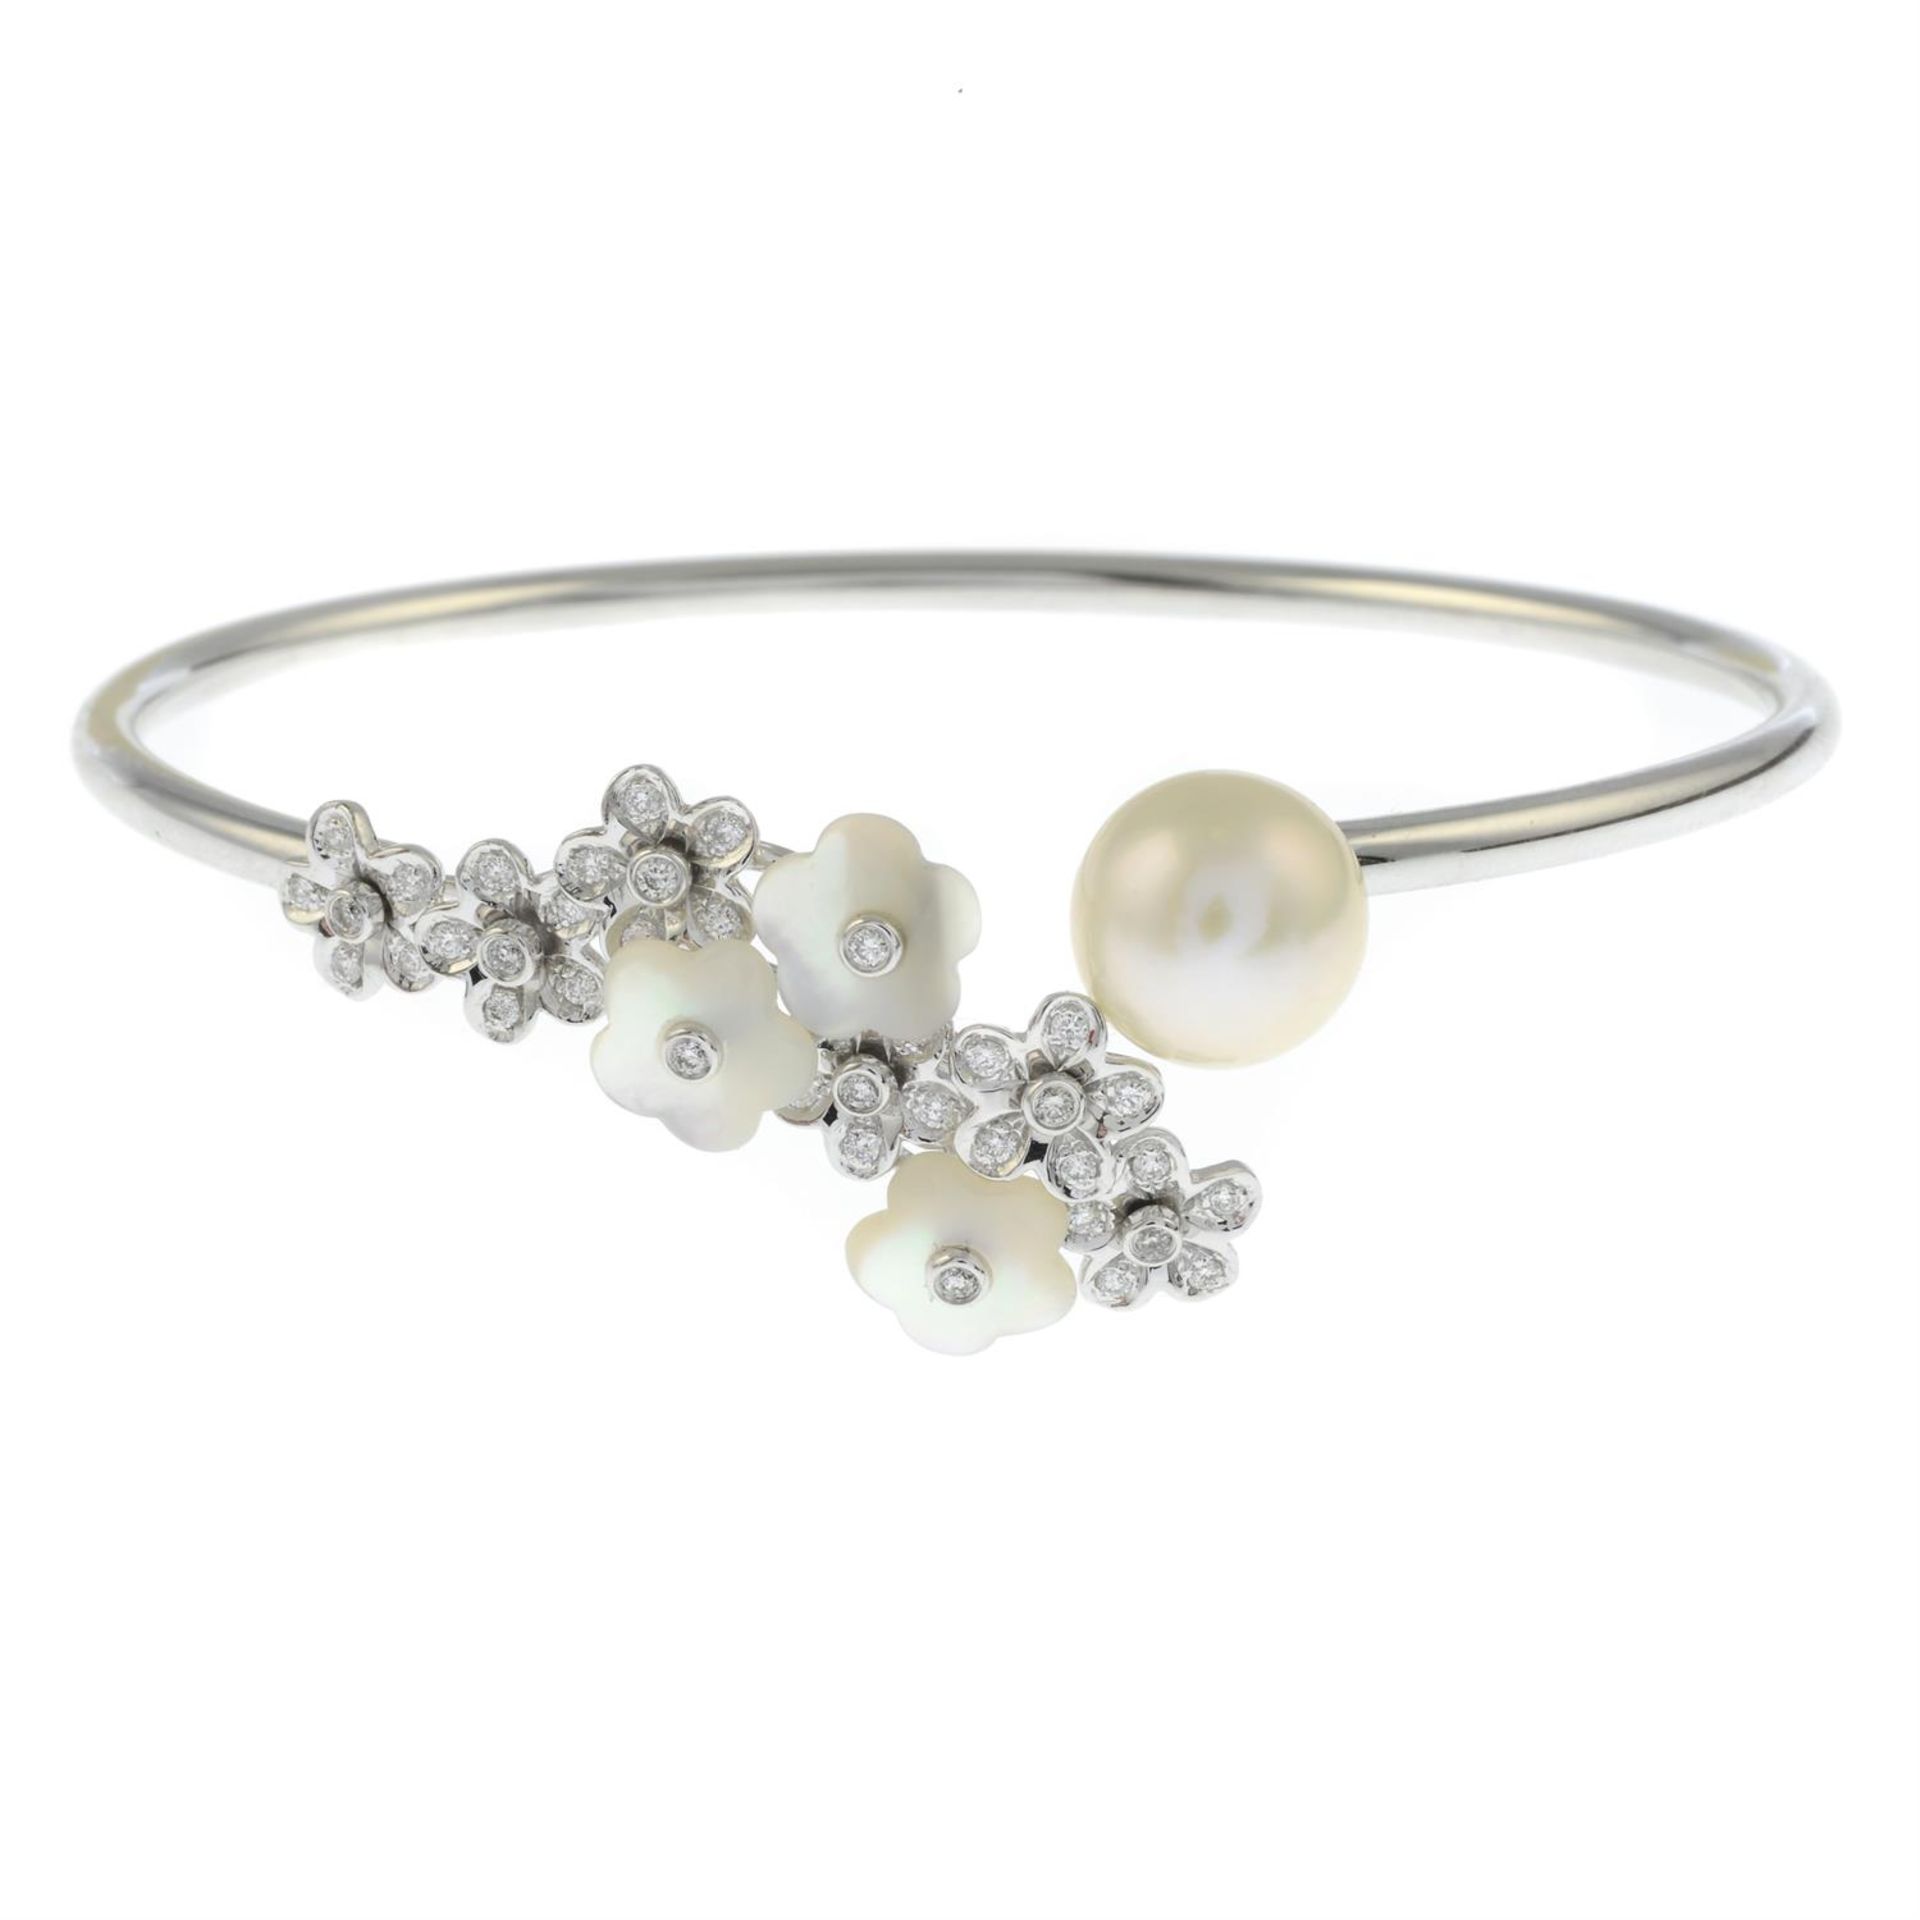 An 18ct gold diamond, mother-of-pearl and cultured pearl floral cuff bangle. - Image 2 of 3